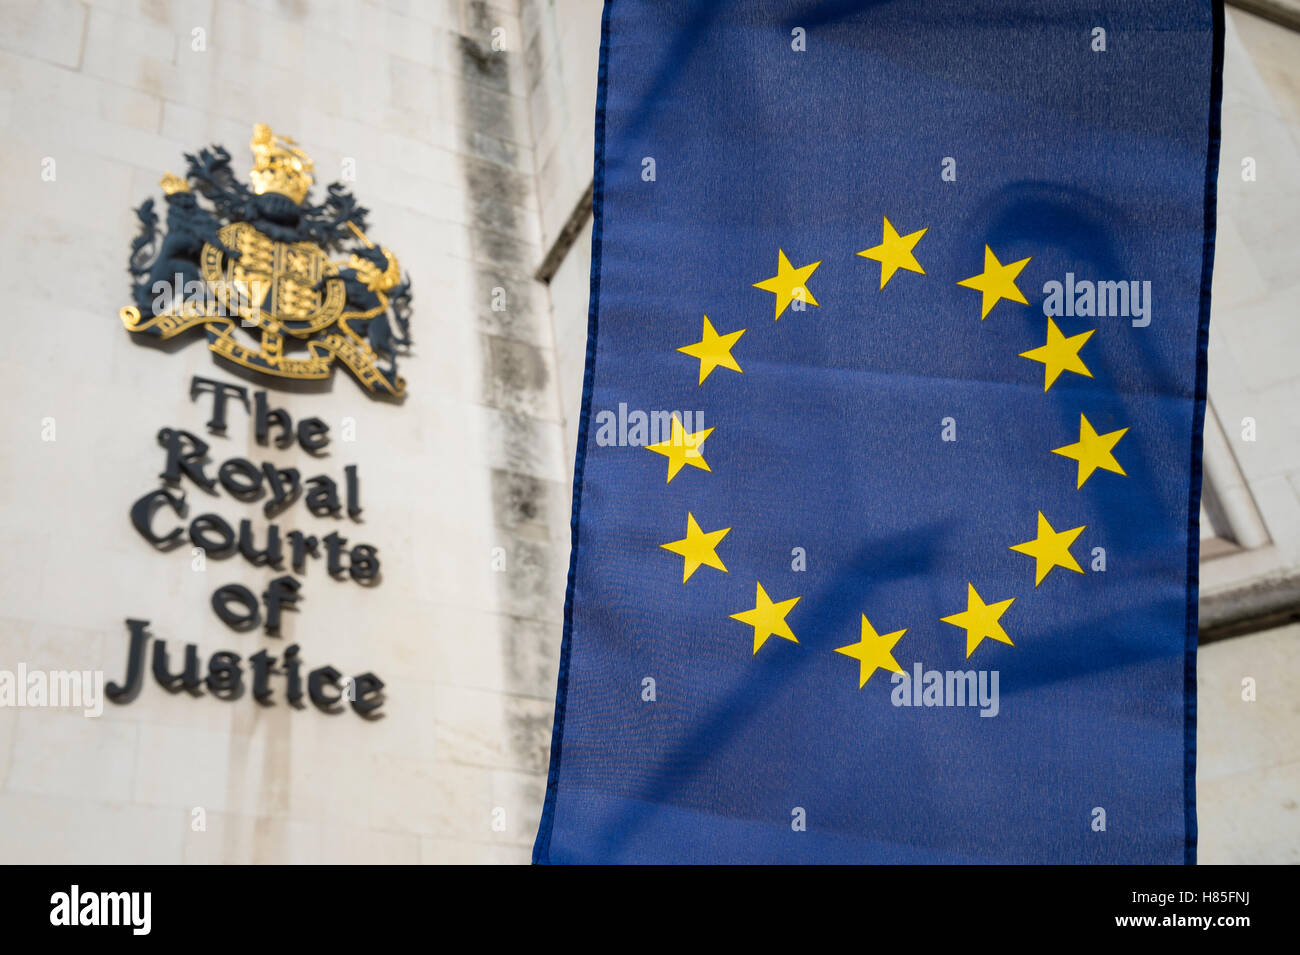 European Union flag flying in front of The Royal Courts of Justice public building in London, UK Stock Photo